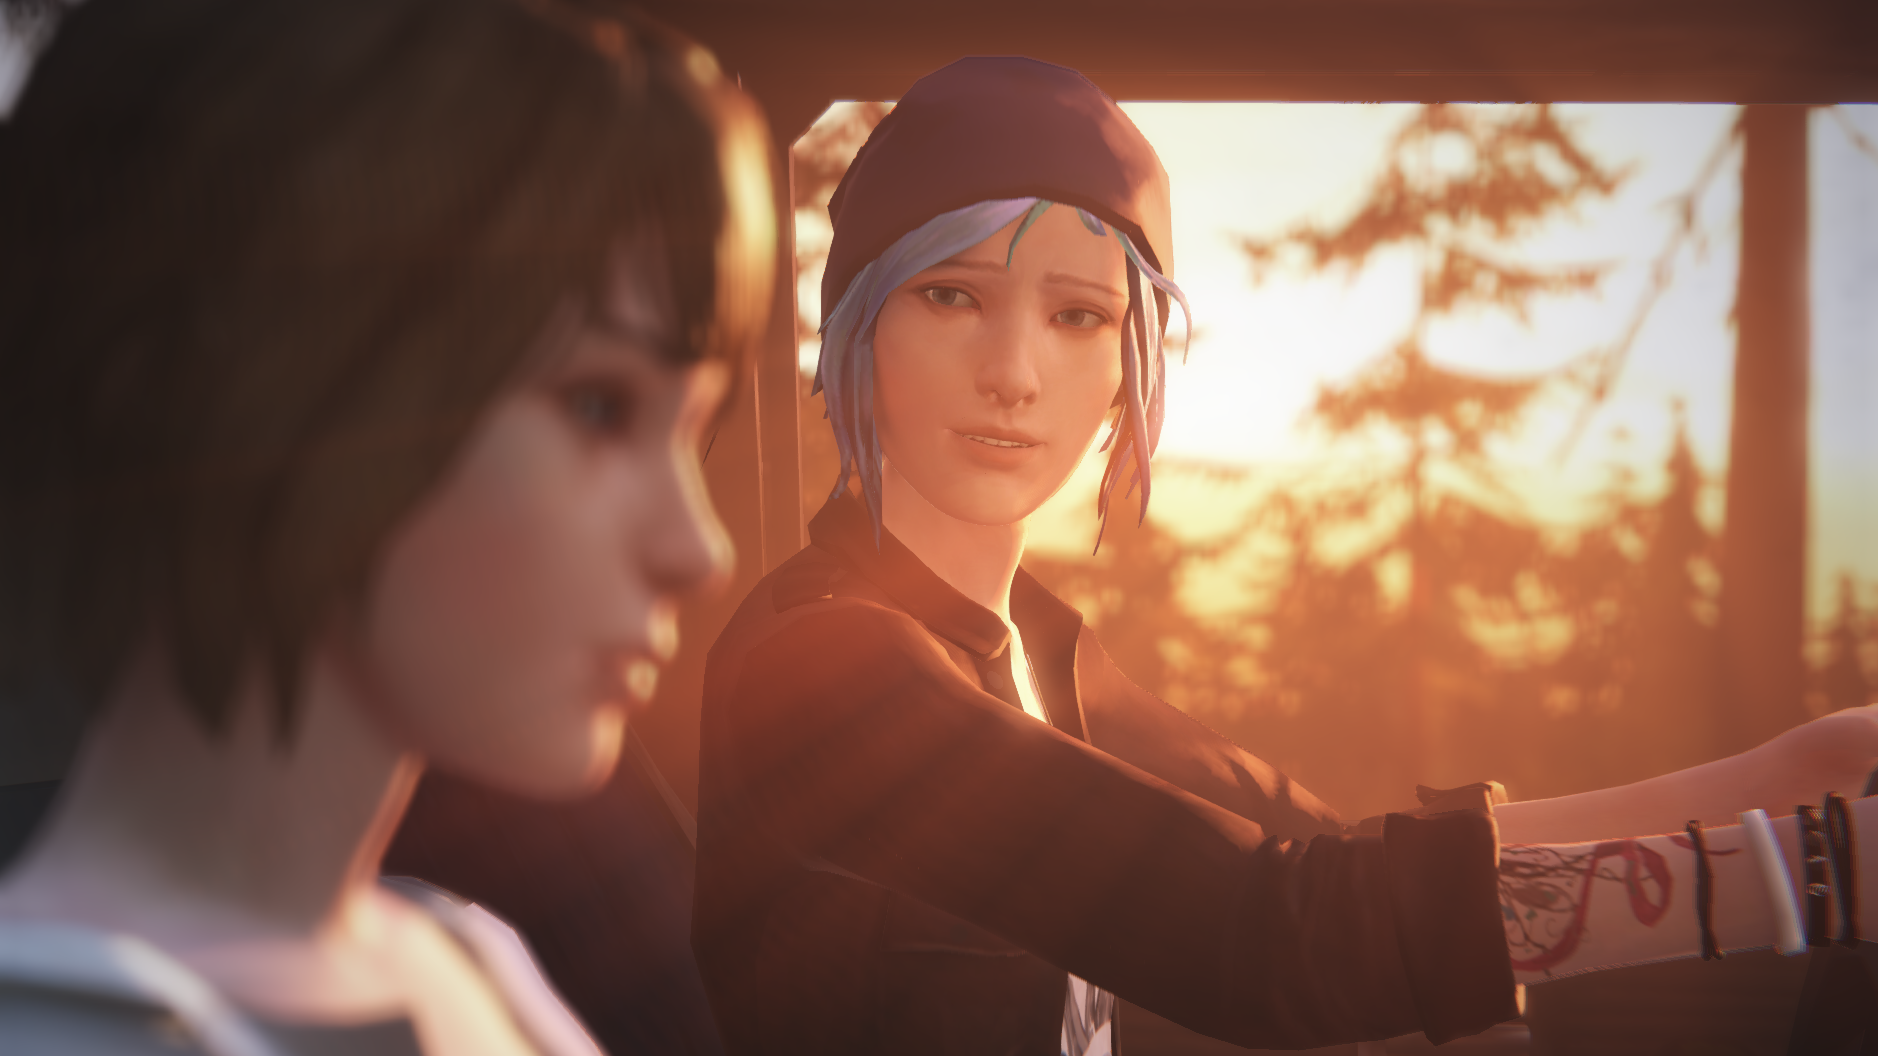 Image for Original Life is Strange team share first teaser for new project